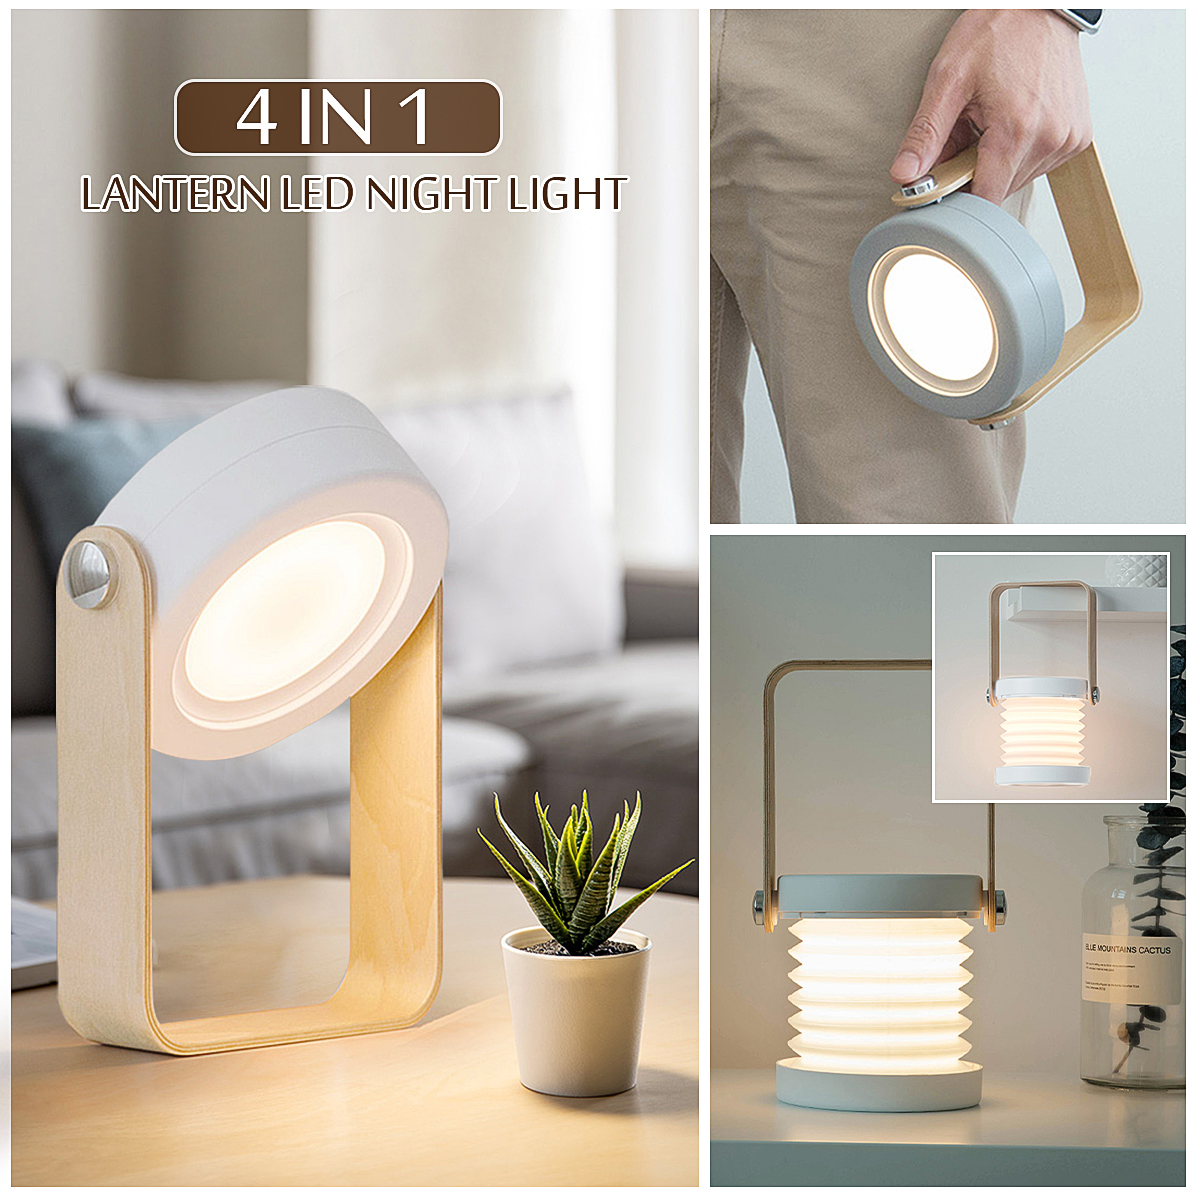 4 In 1 Portable Lantern LED Night Light Table Lamp Flash Rechargeable